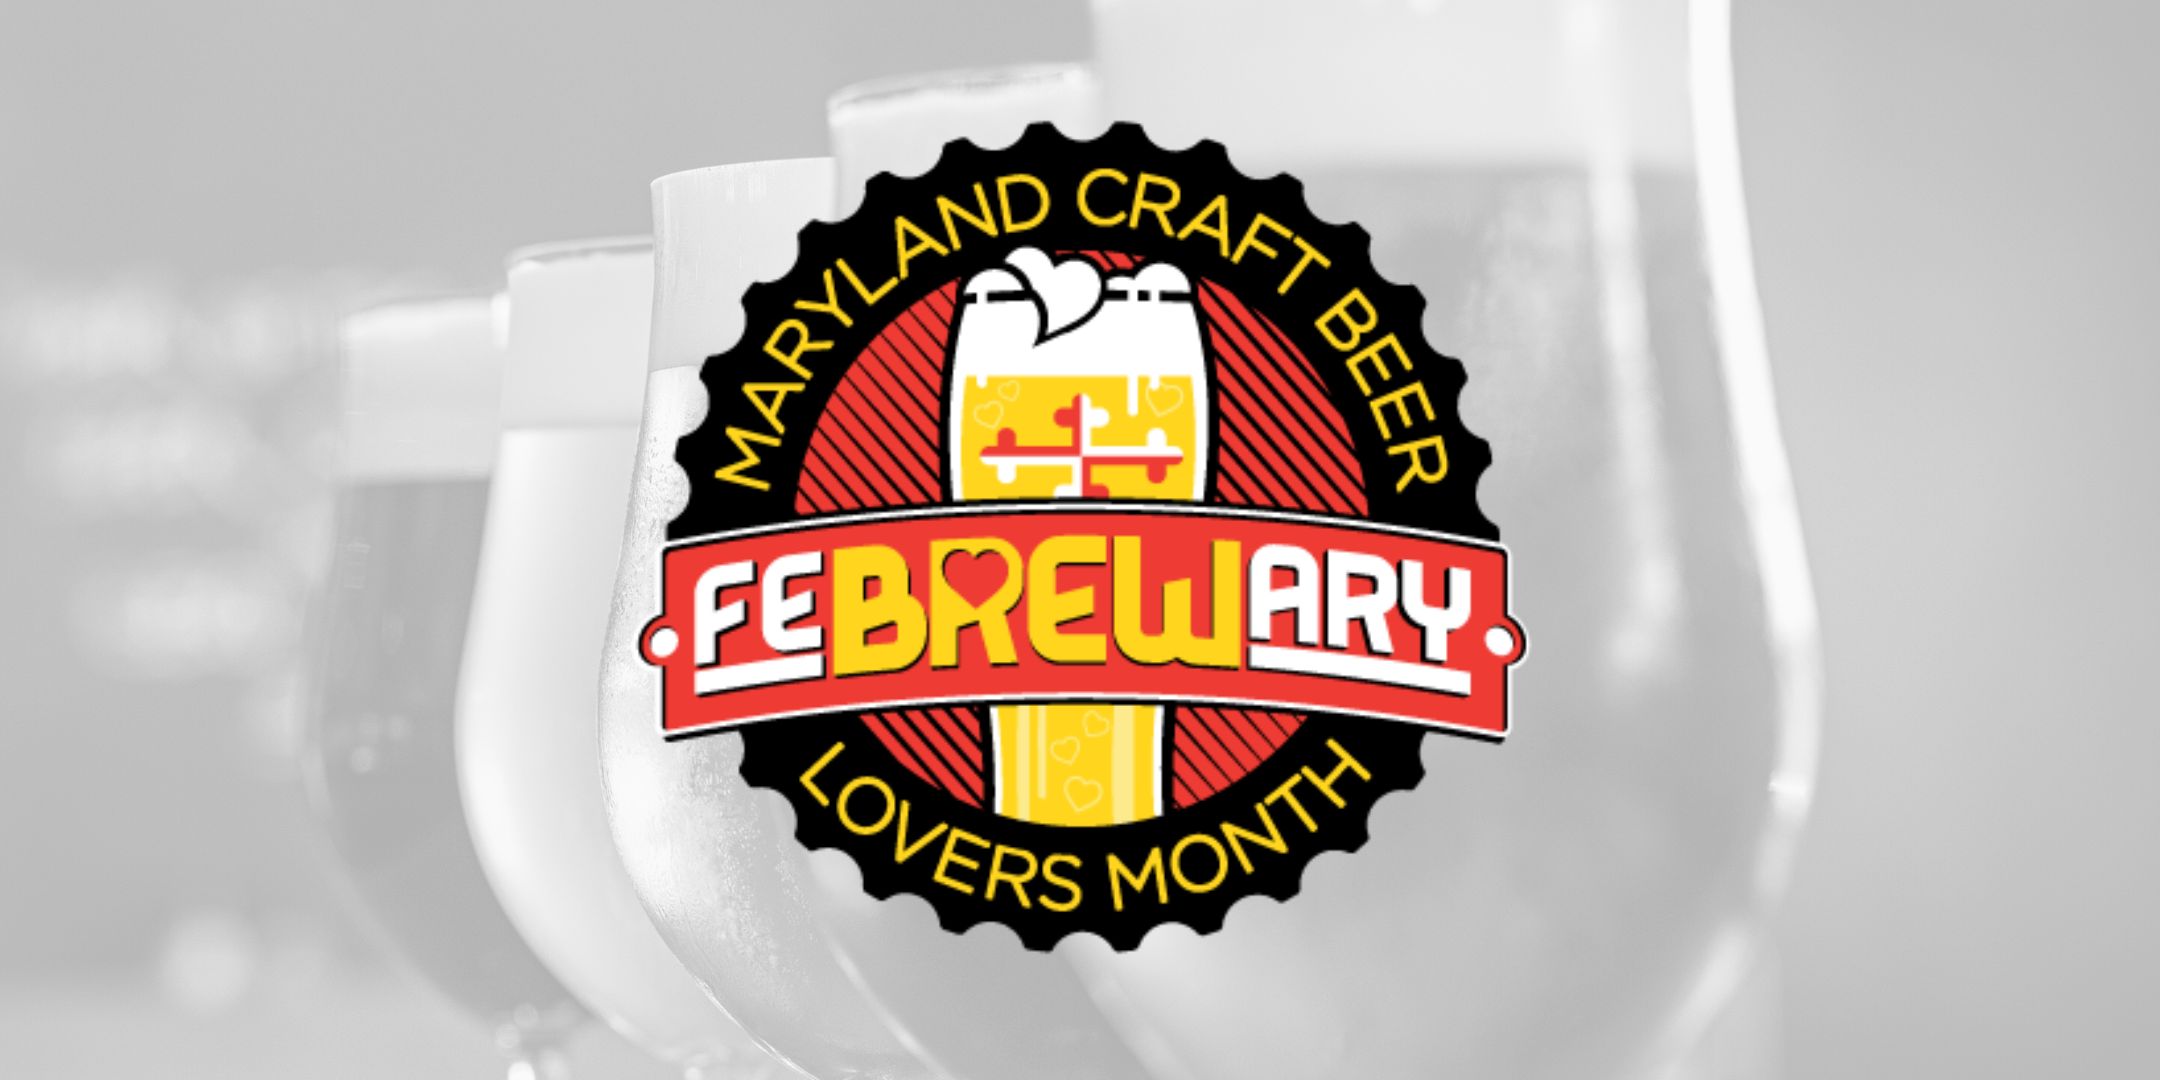 Breweries, Retailers and Consumers Prepare For Maryland Craft Beer Lovers Month